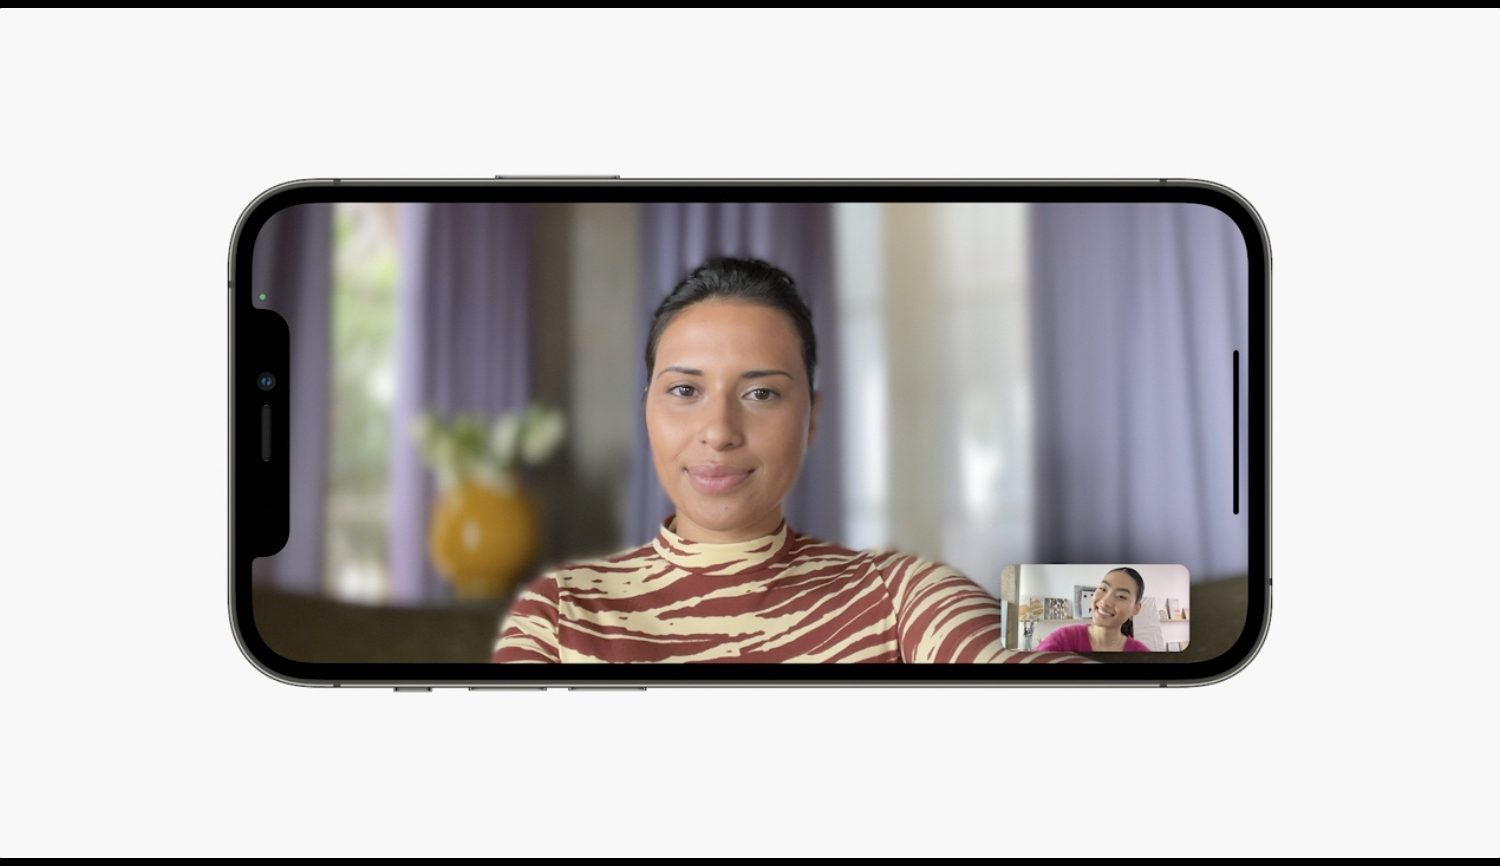 An iPhone showing a woman on iPhone screen during a video call with her background blurred